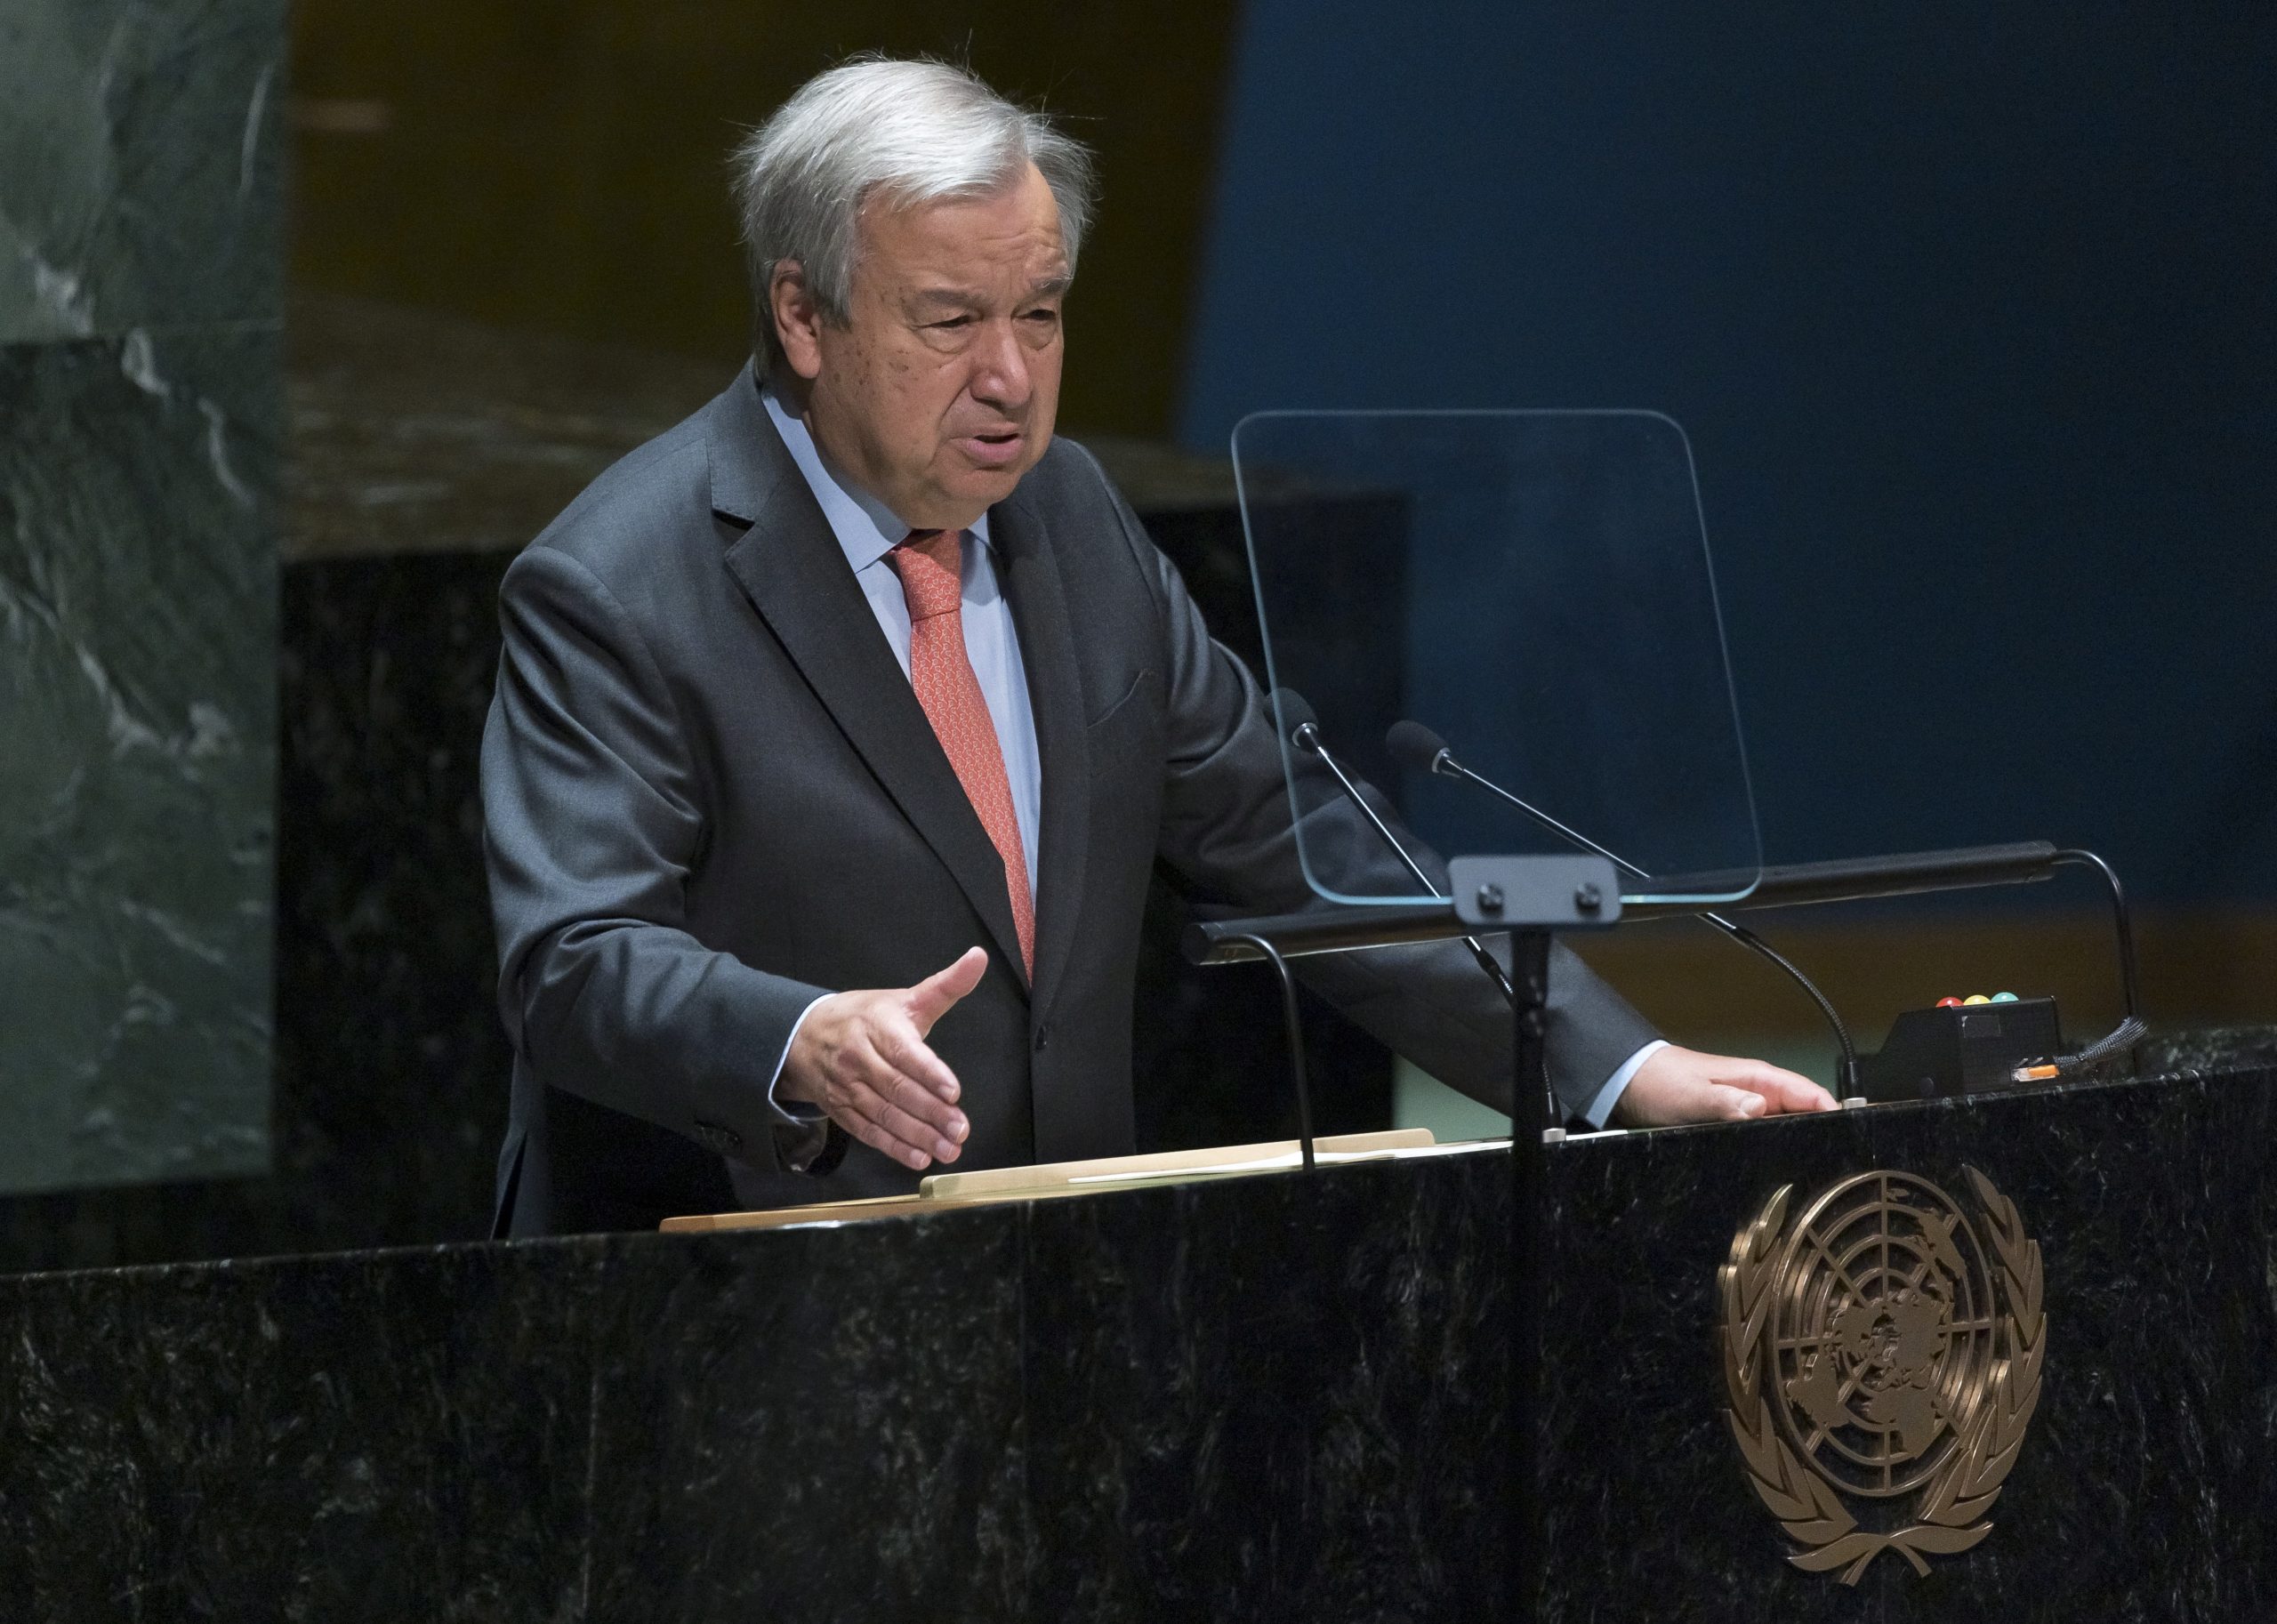 epa10101611 United Nations Secretary-General Antonio Guterres addresses the Tenth Review Conference of the Parties to the Treaty on the Non-Proliferation of Nuclear Weapons (NPT) at United Nations headquarters in New York, New York, USA, 01 August 2022. The NPT is an international treaty intended to prevent the spread of nuclear weapons and promote the safety of nuclear energy, with the long term objective of achieving complete disarmament.  EPA/JUSTIN LANE